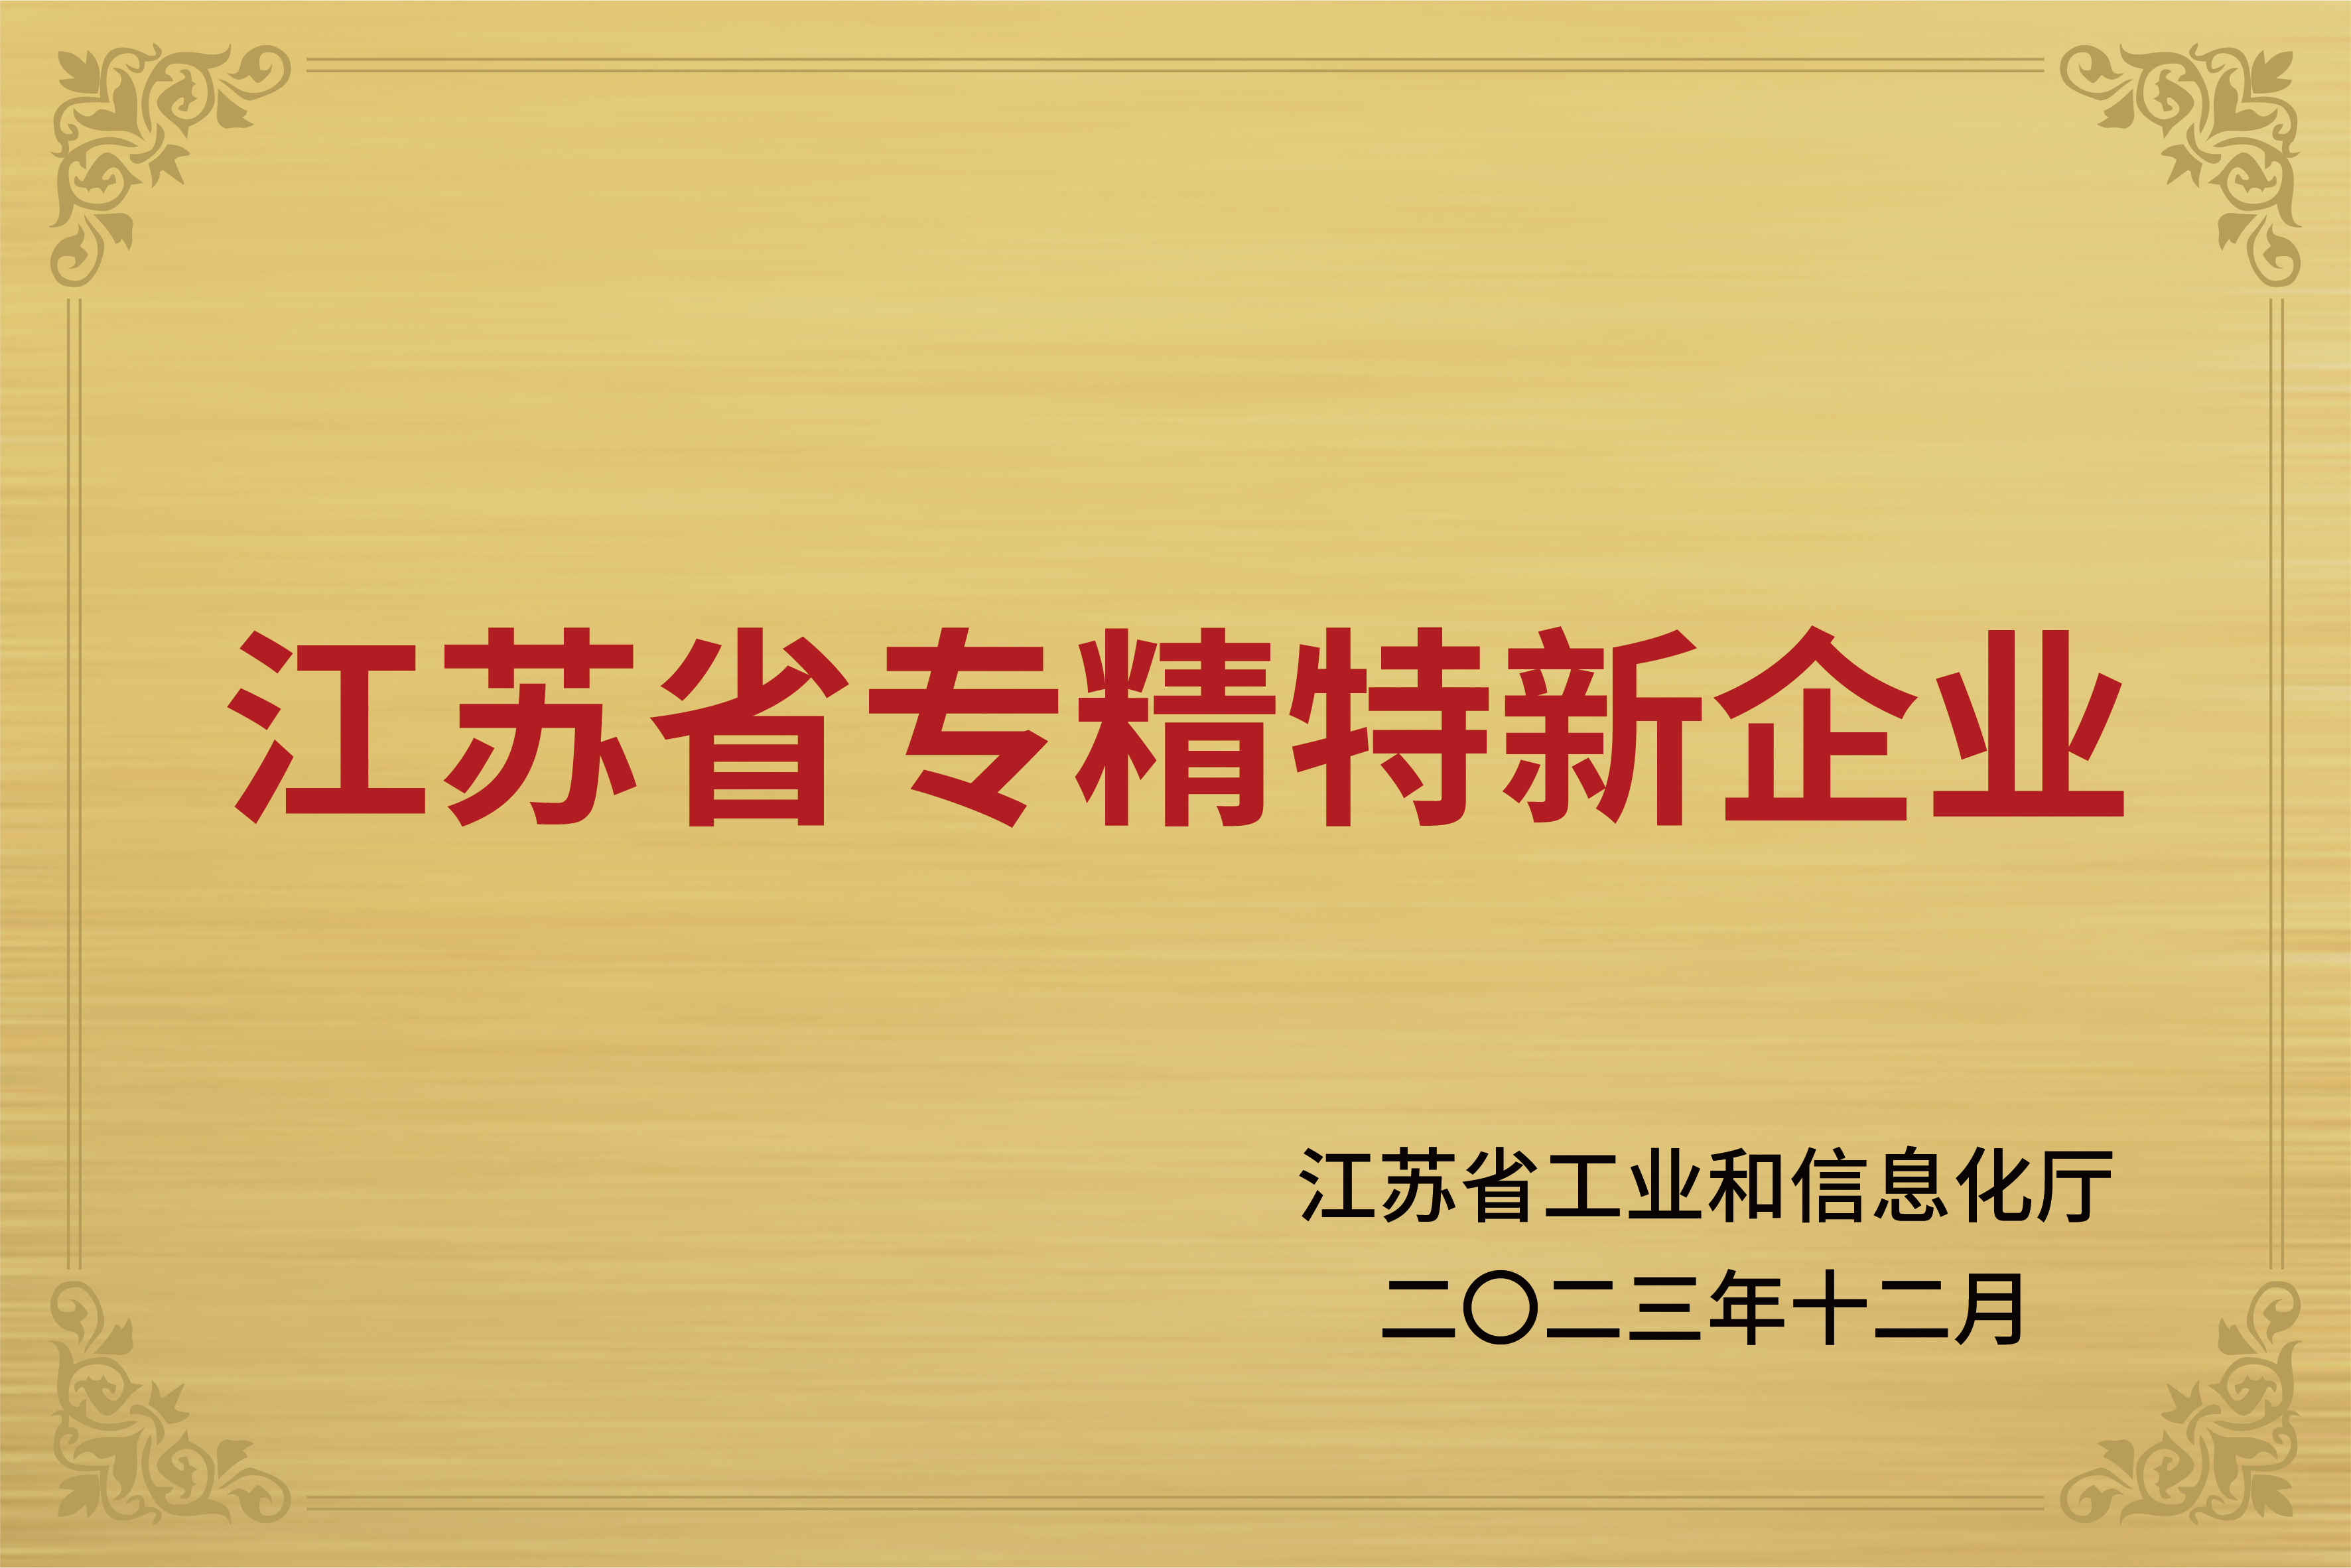 Lees Power Won The Title of "Jiangsu Province specialized and special New Enterprise"